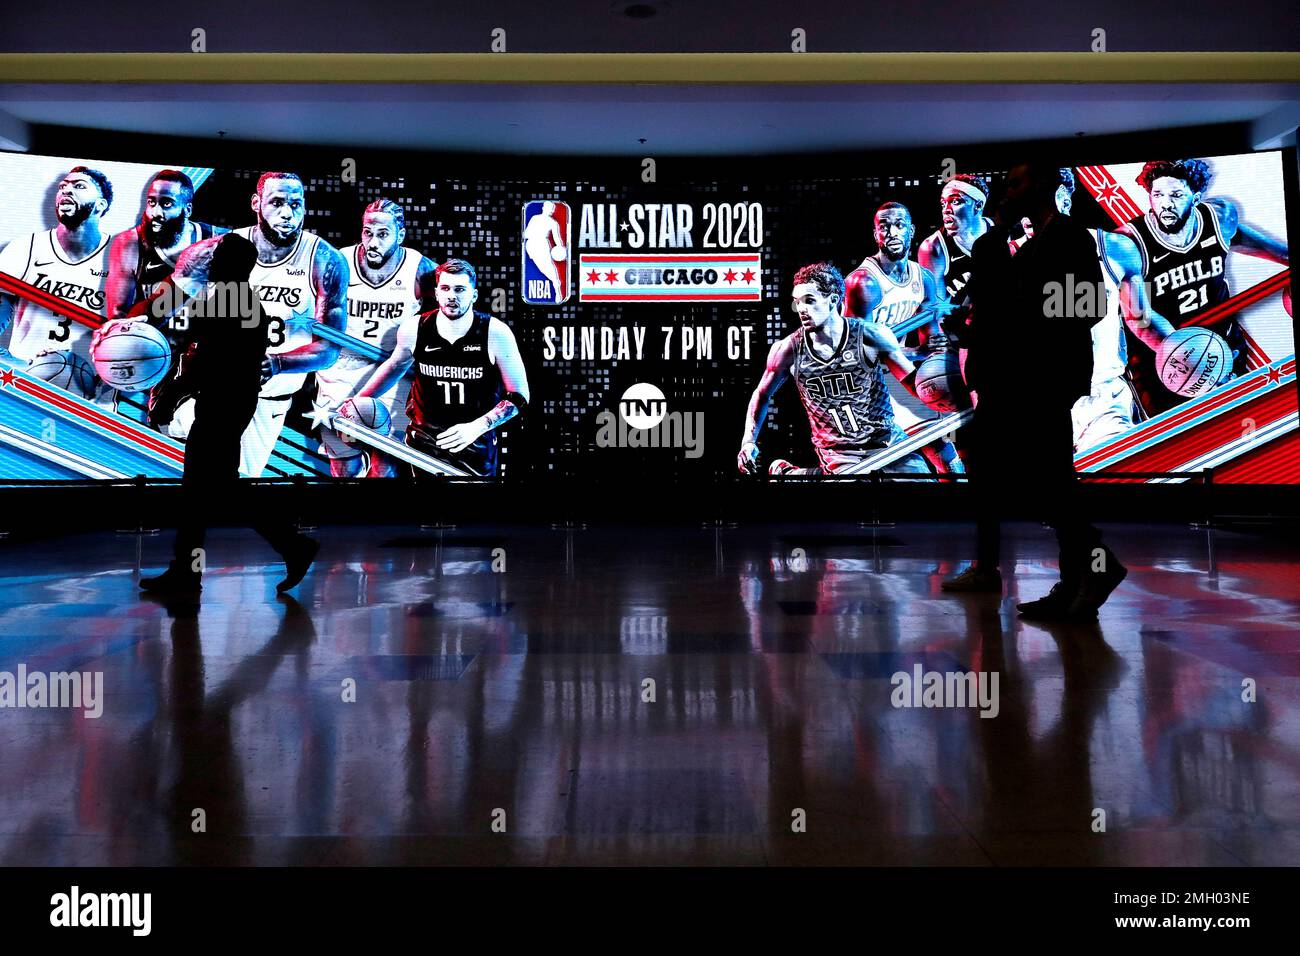 NBA All-Star Game at the United Center